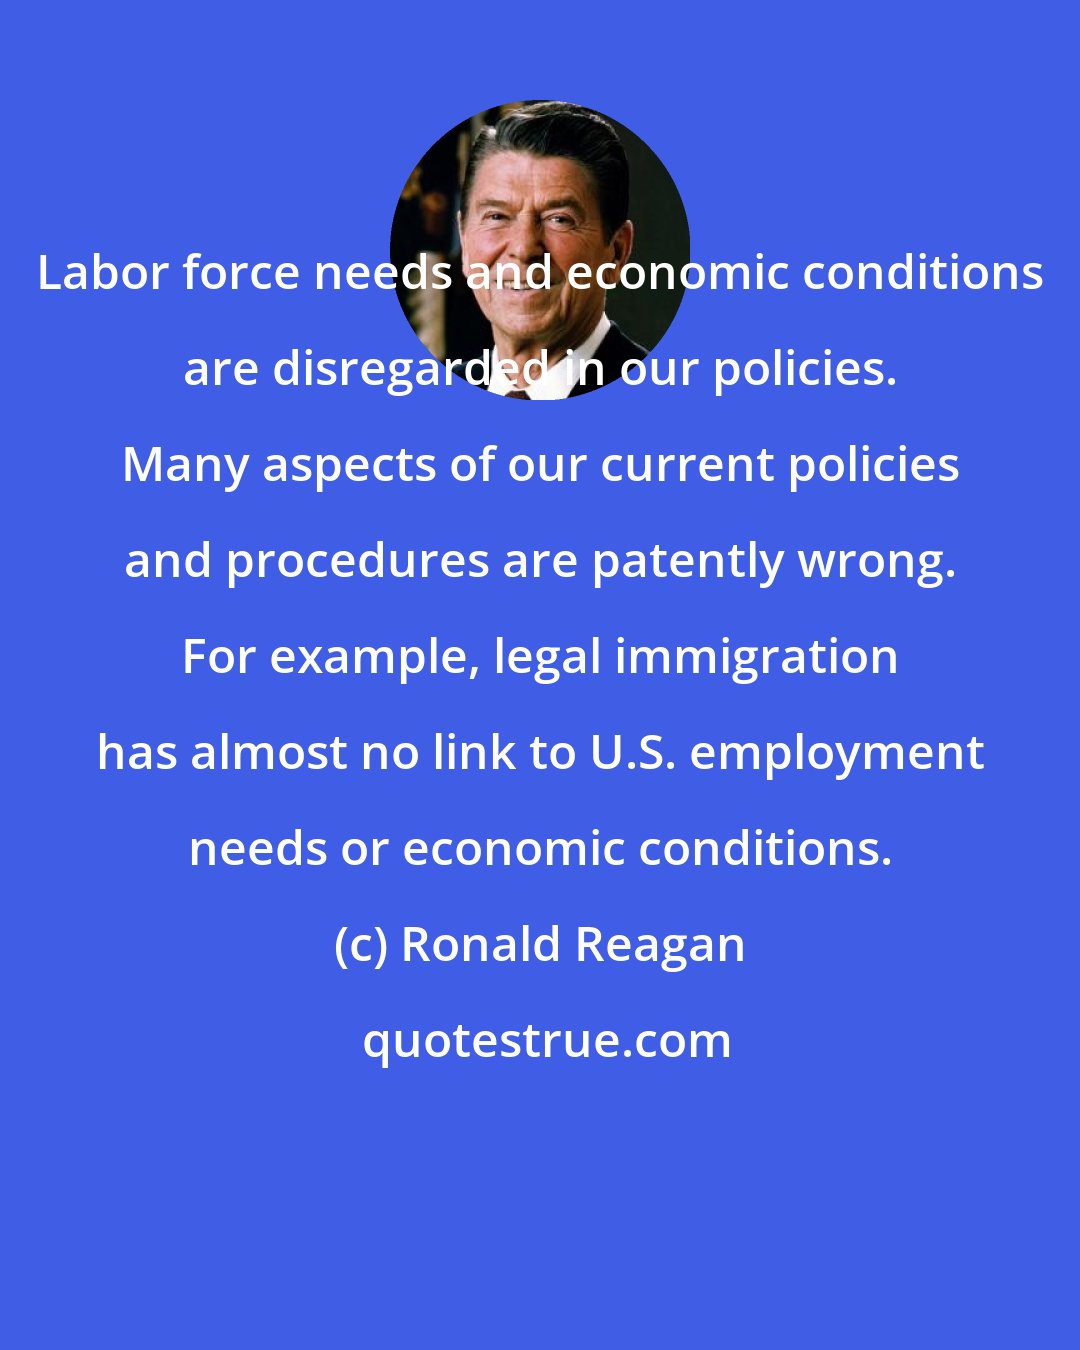 Ronald Reagan: Labor force needs and economic conditions are disregarded in our policies. Many aspects of our current policies and procedures are patently wrong. For example, legal immigration has almost no link to U.S. employment needs or economic conditions.